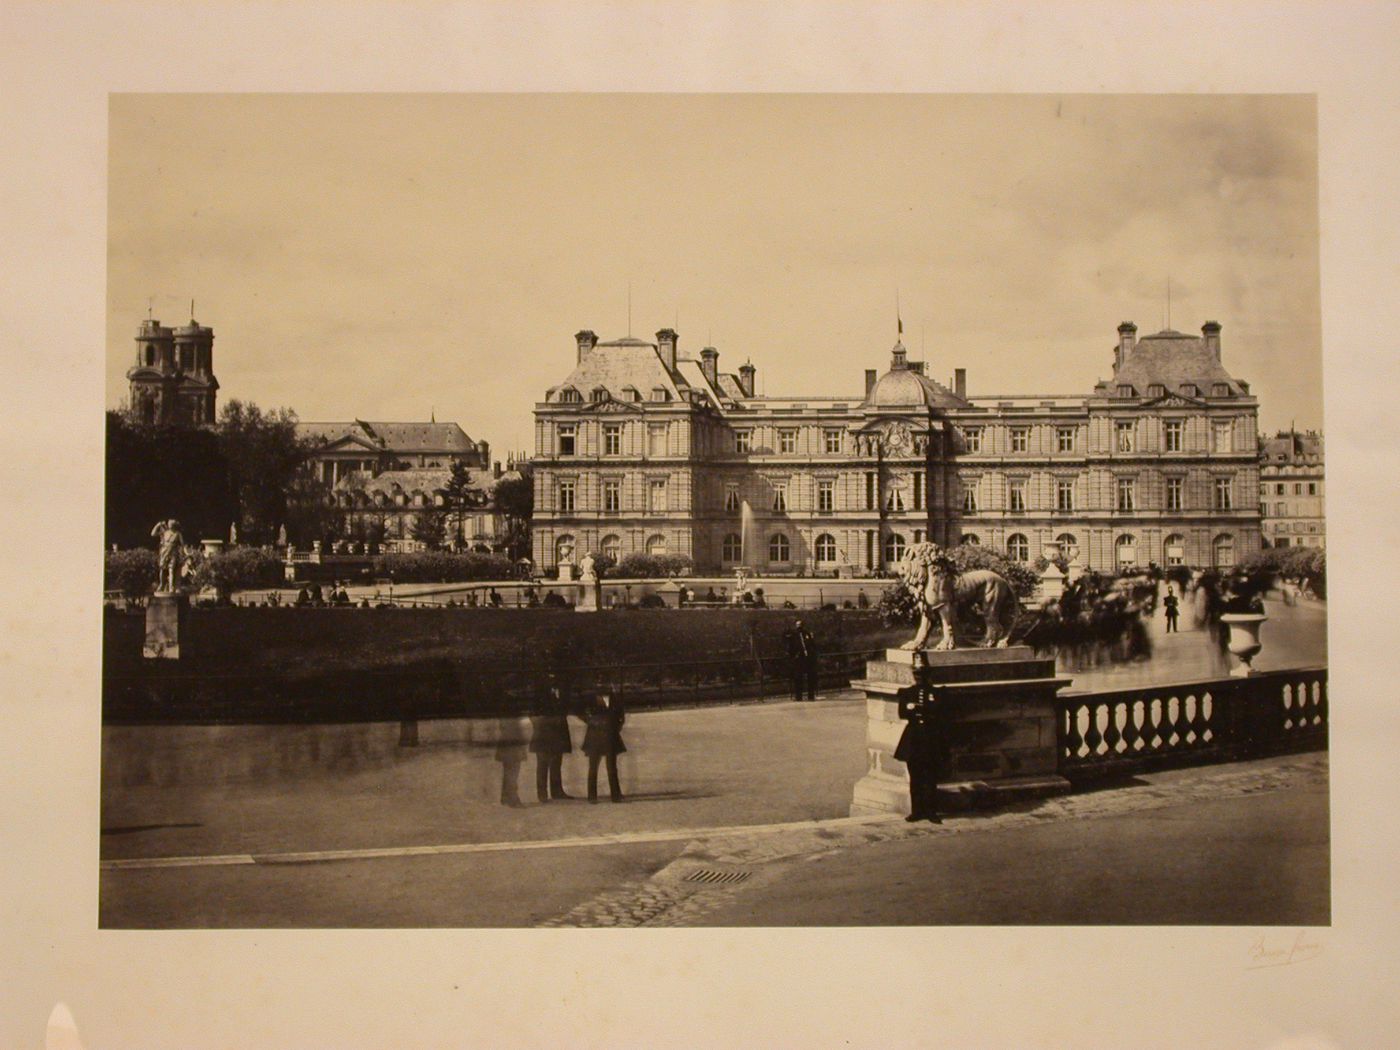 Palais du Luxembourg, view of garden and palace, Paris, France